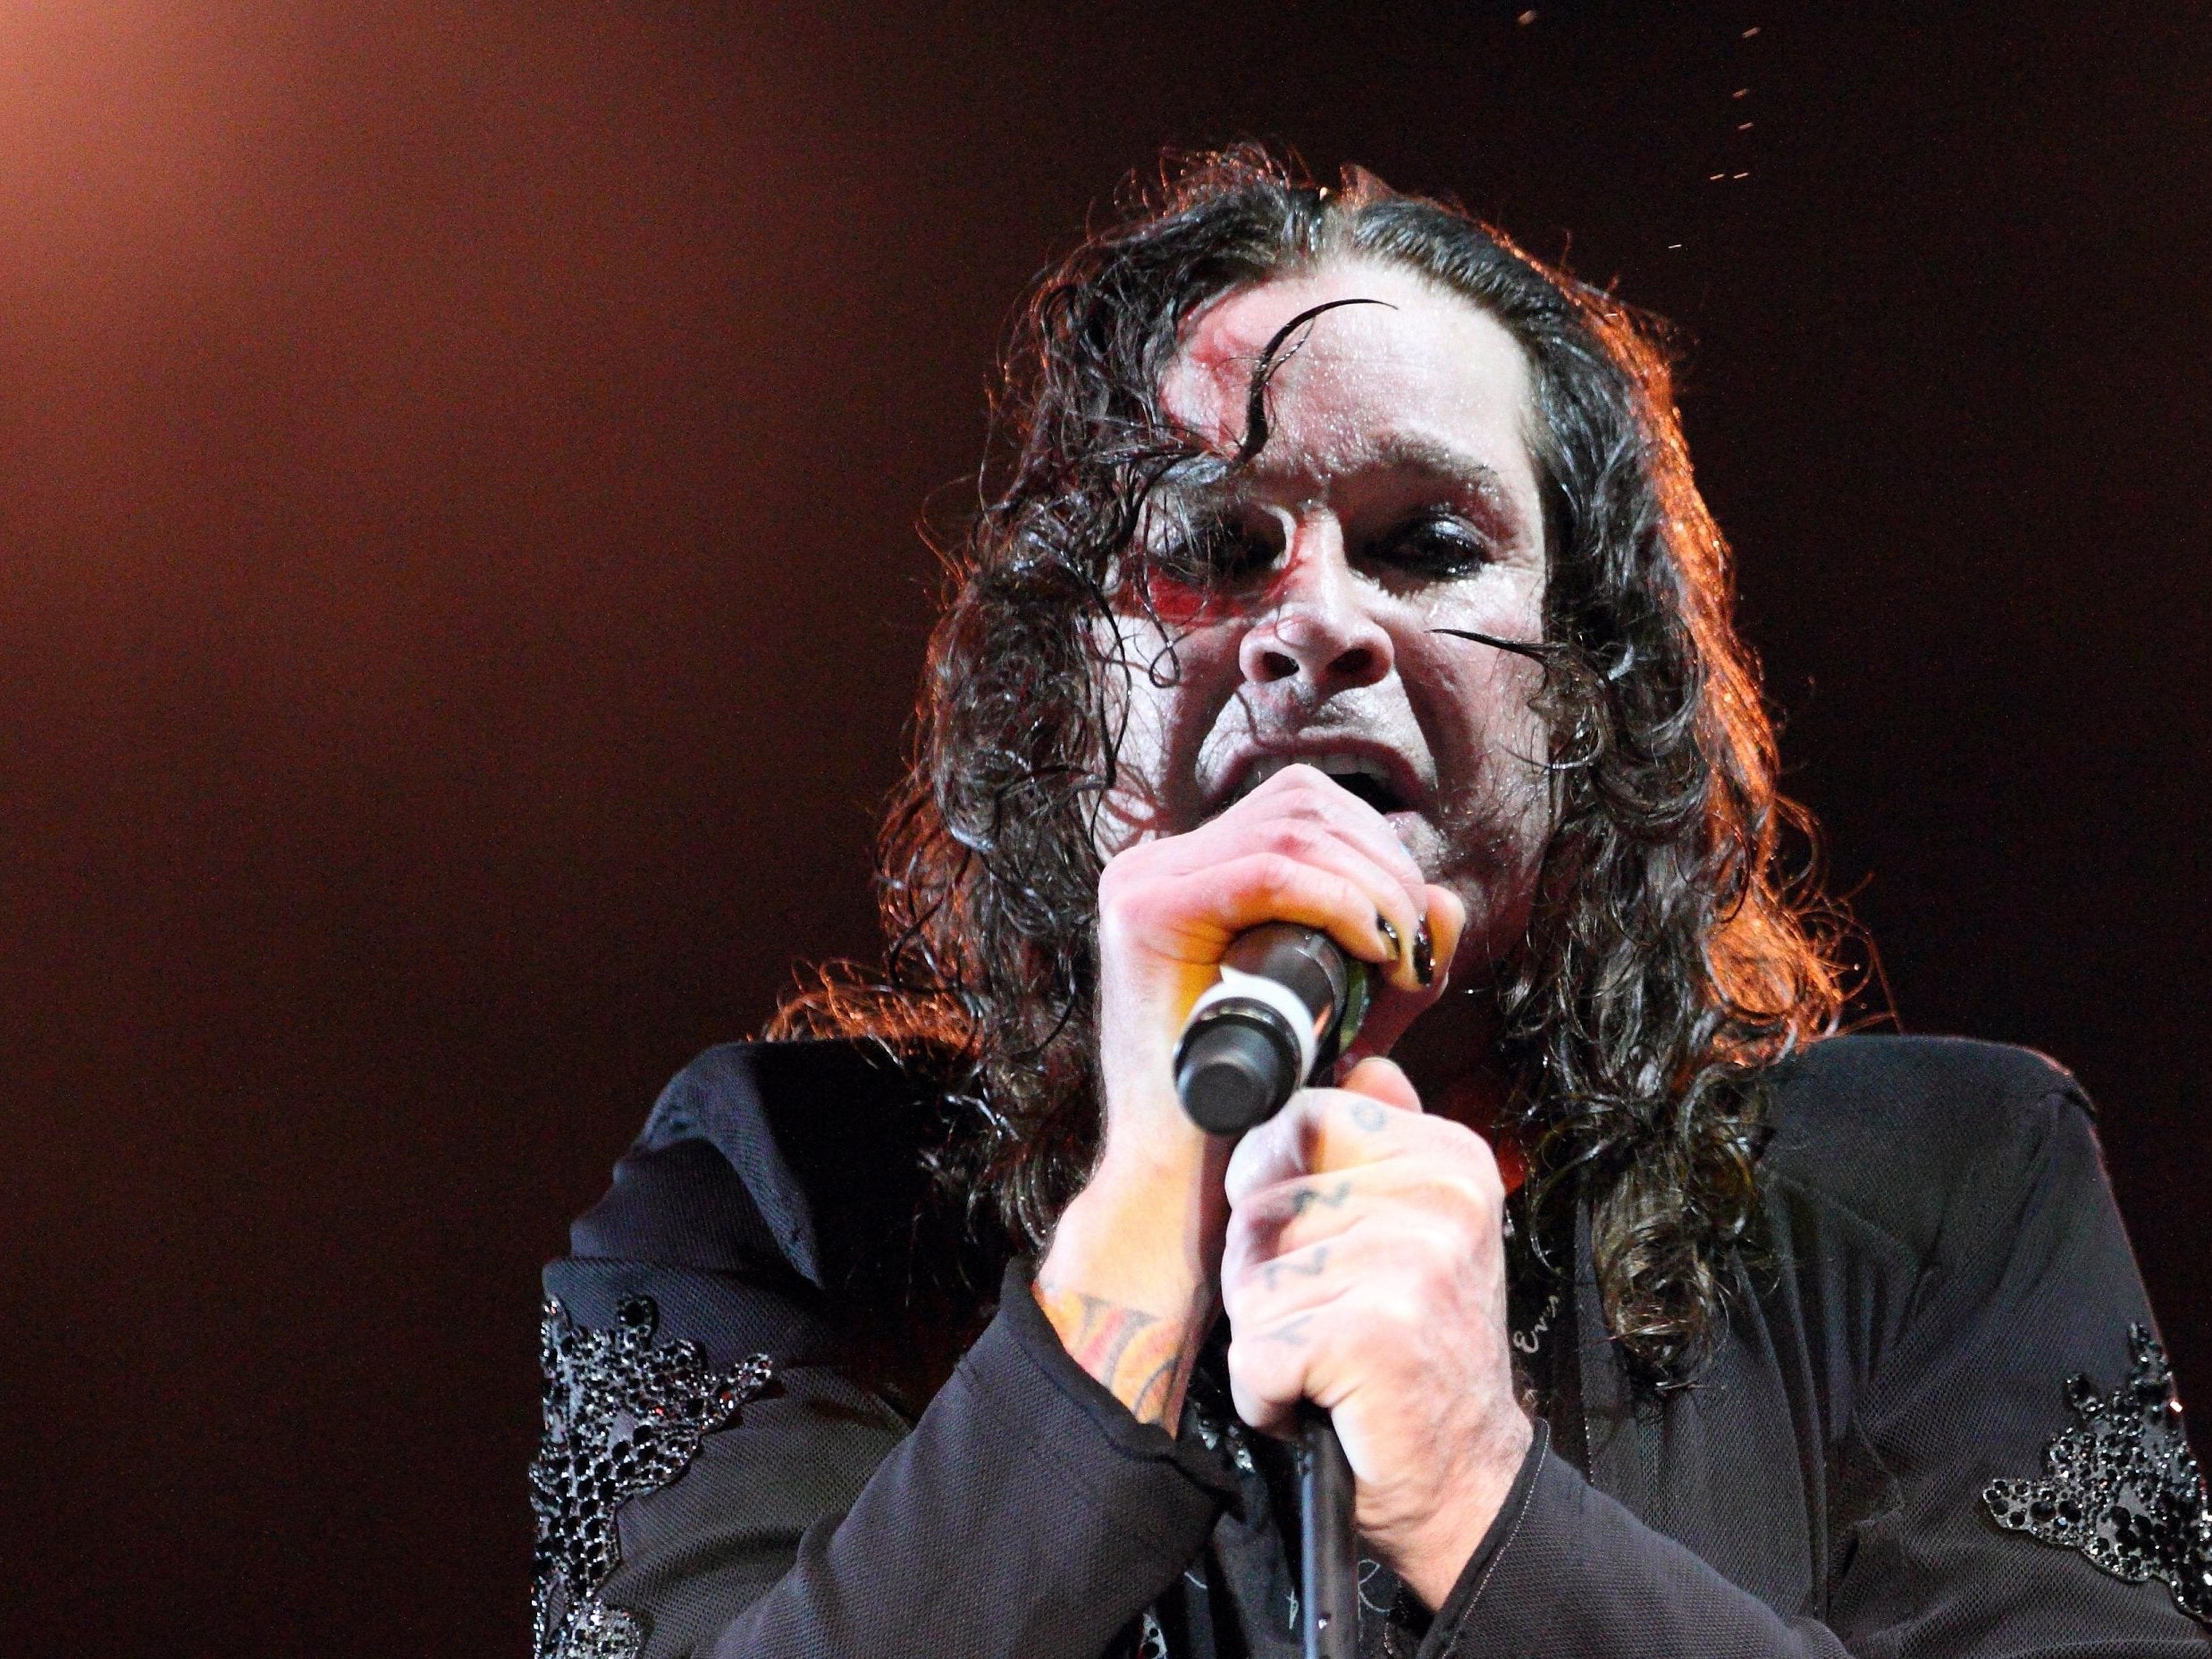 Ozzy Osbourne announces rescheduled tour dates for 2020: ‘I can’t wait